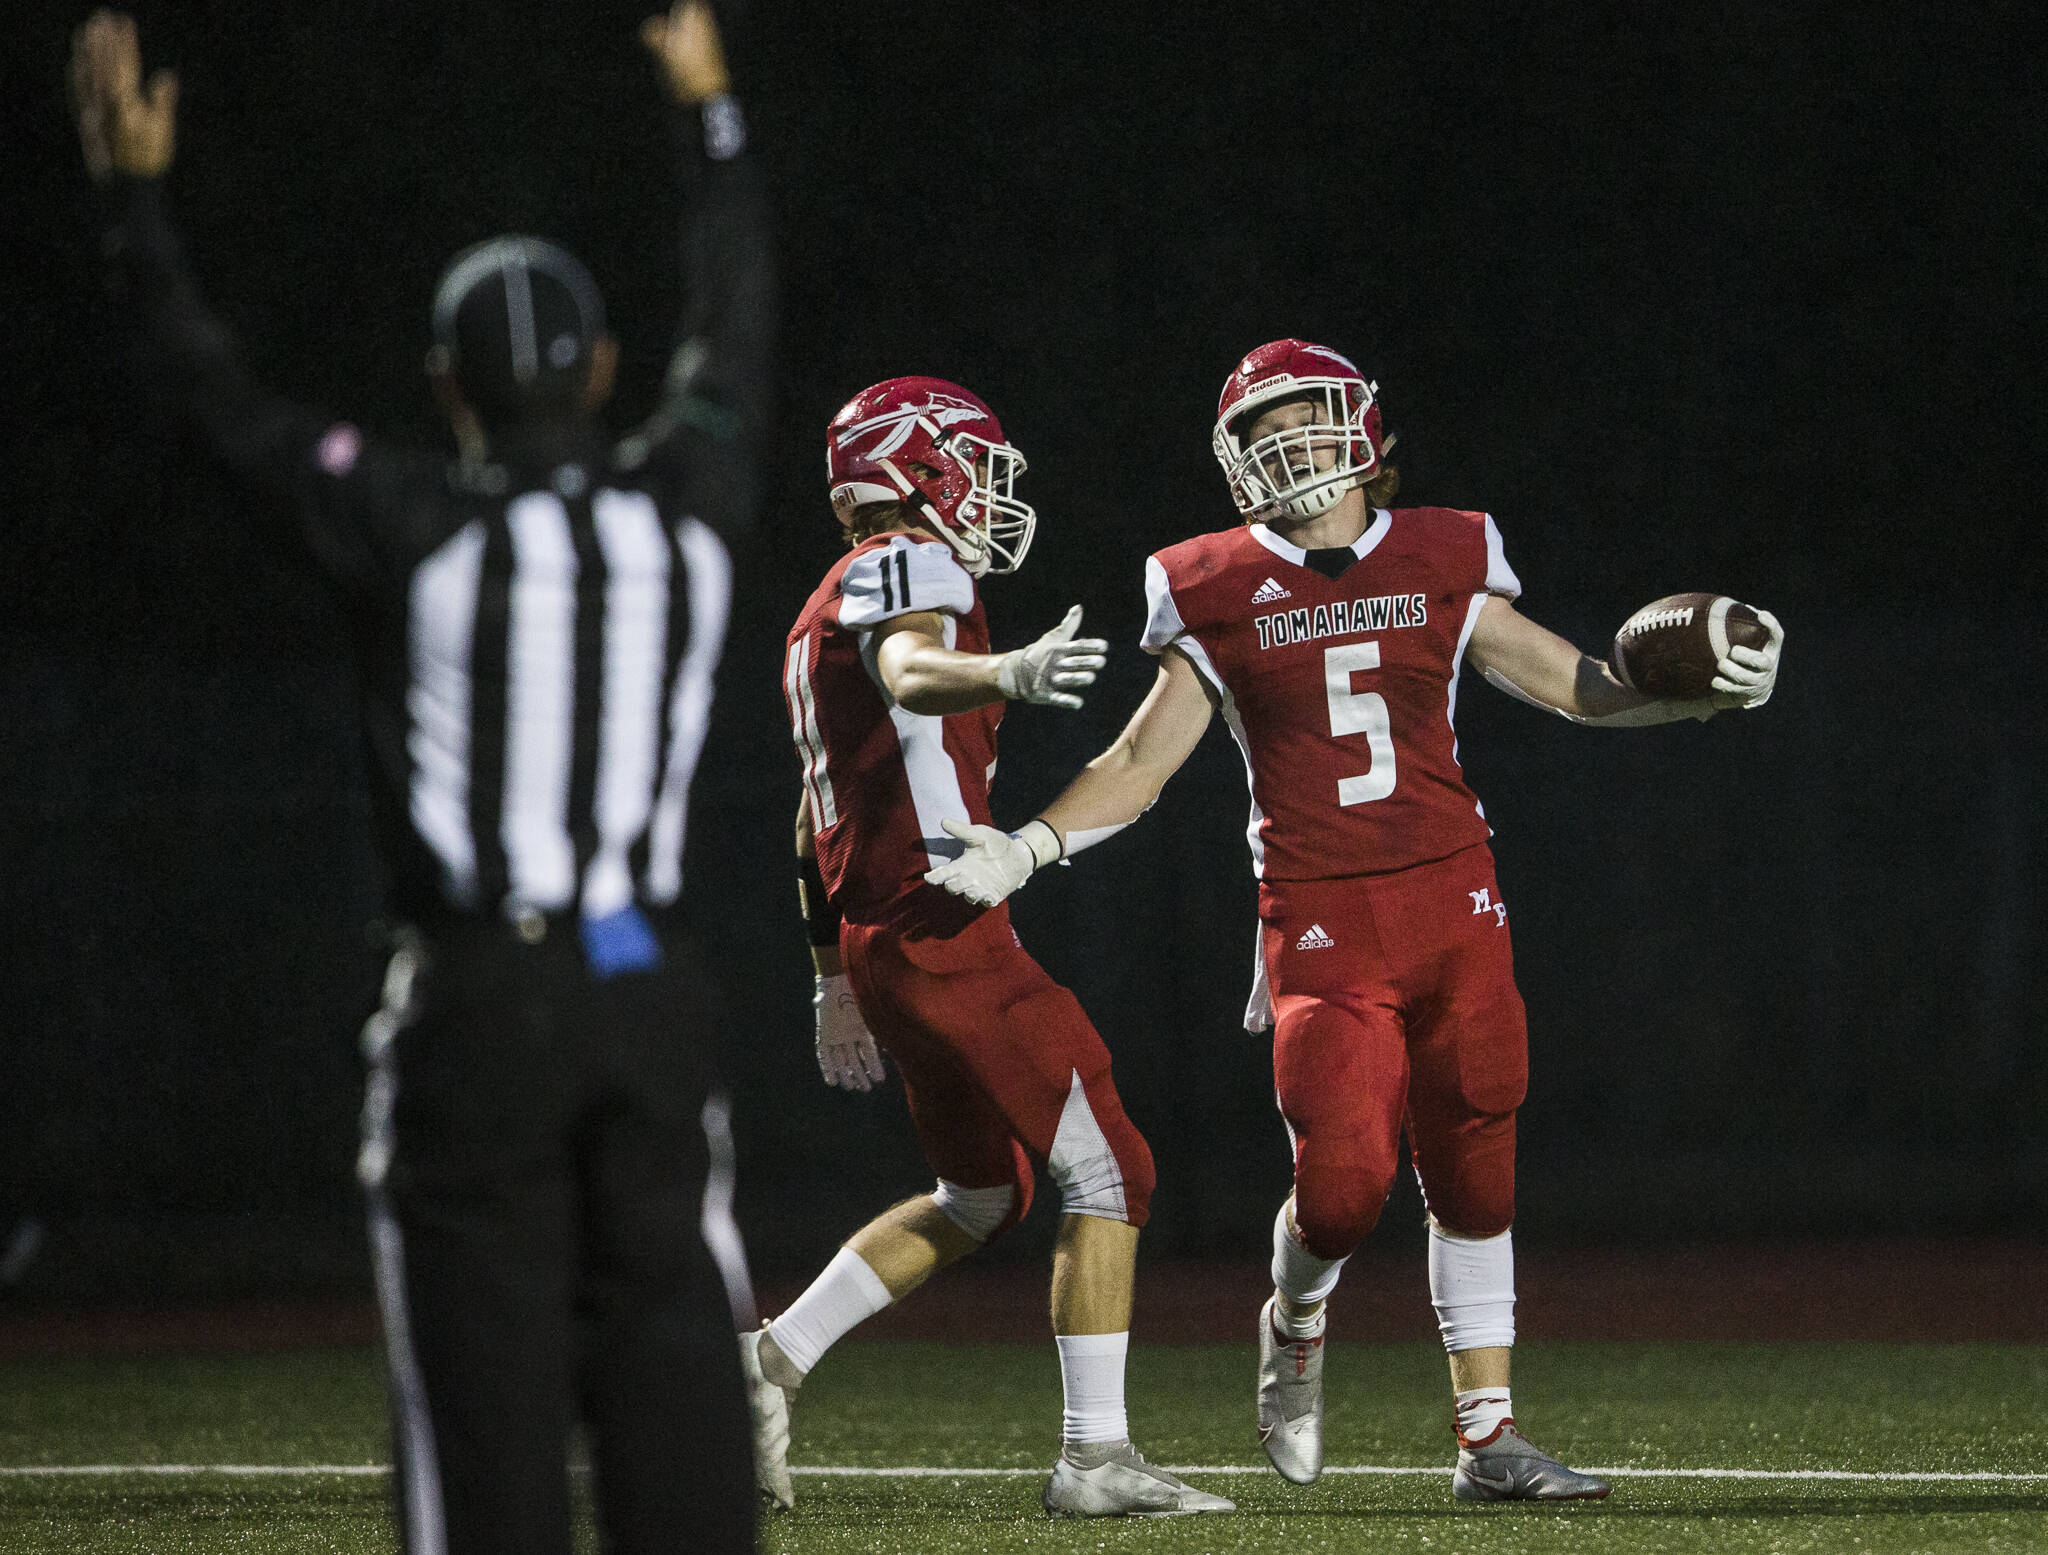 Dylan Carson (right) and the Tomahawks will look to continue their high-scoring ways in Saturday’s state quarterfinal. (Olivia Vanni / The Herald)